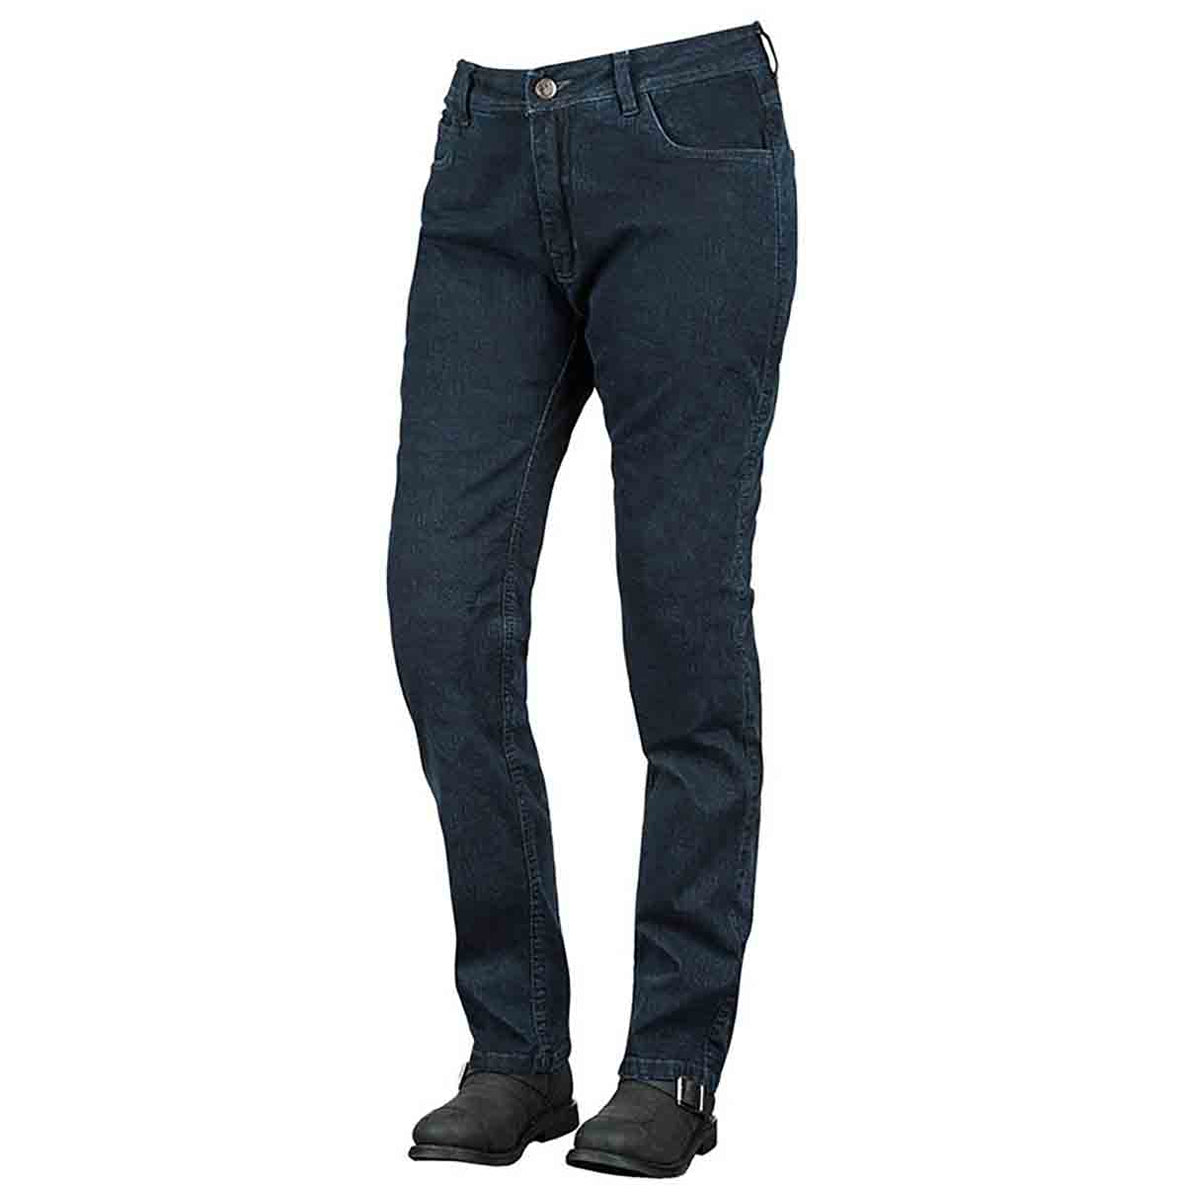 Speed And Strength True Romance Armored Stretch Jean Women's Cruiser Pants